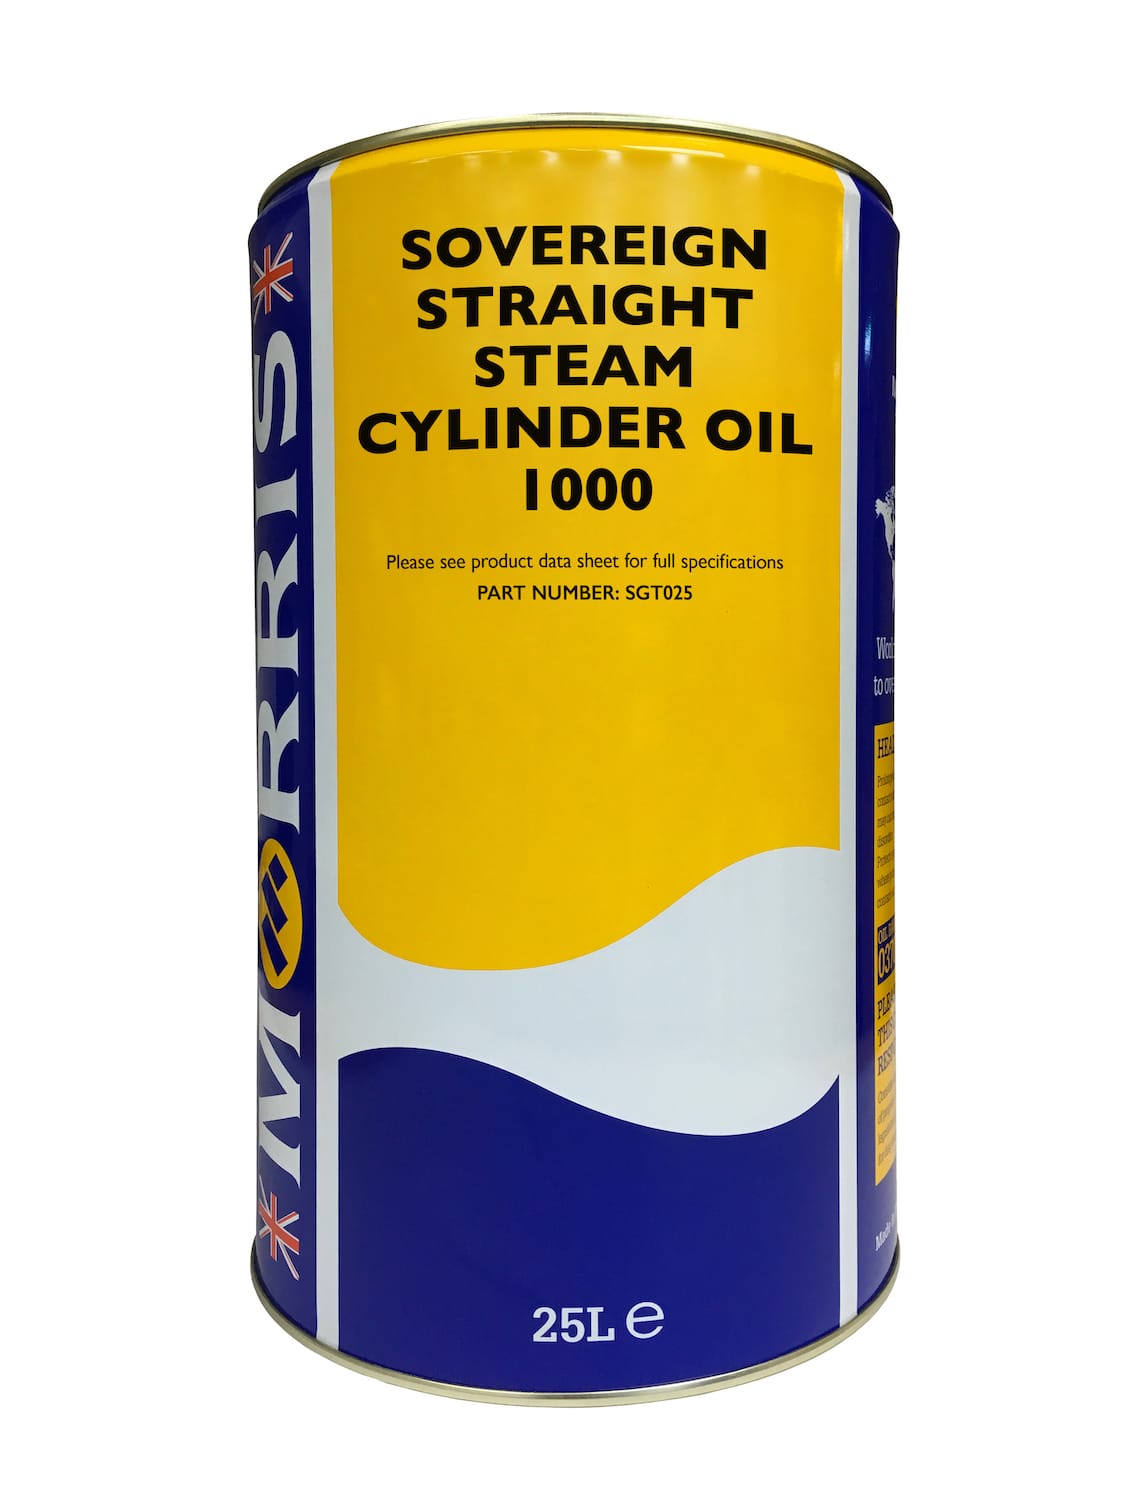 Morris Compounded Steam Cyl Oil 1000 25L